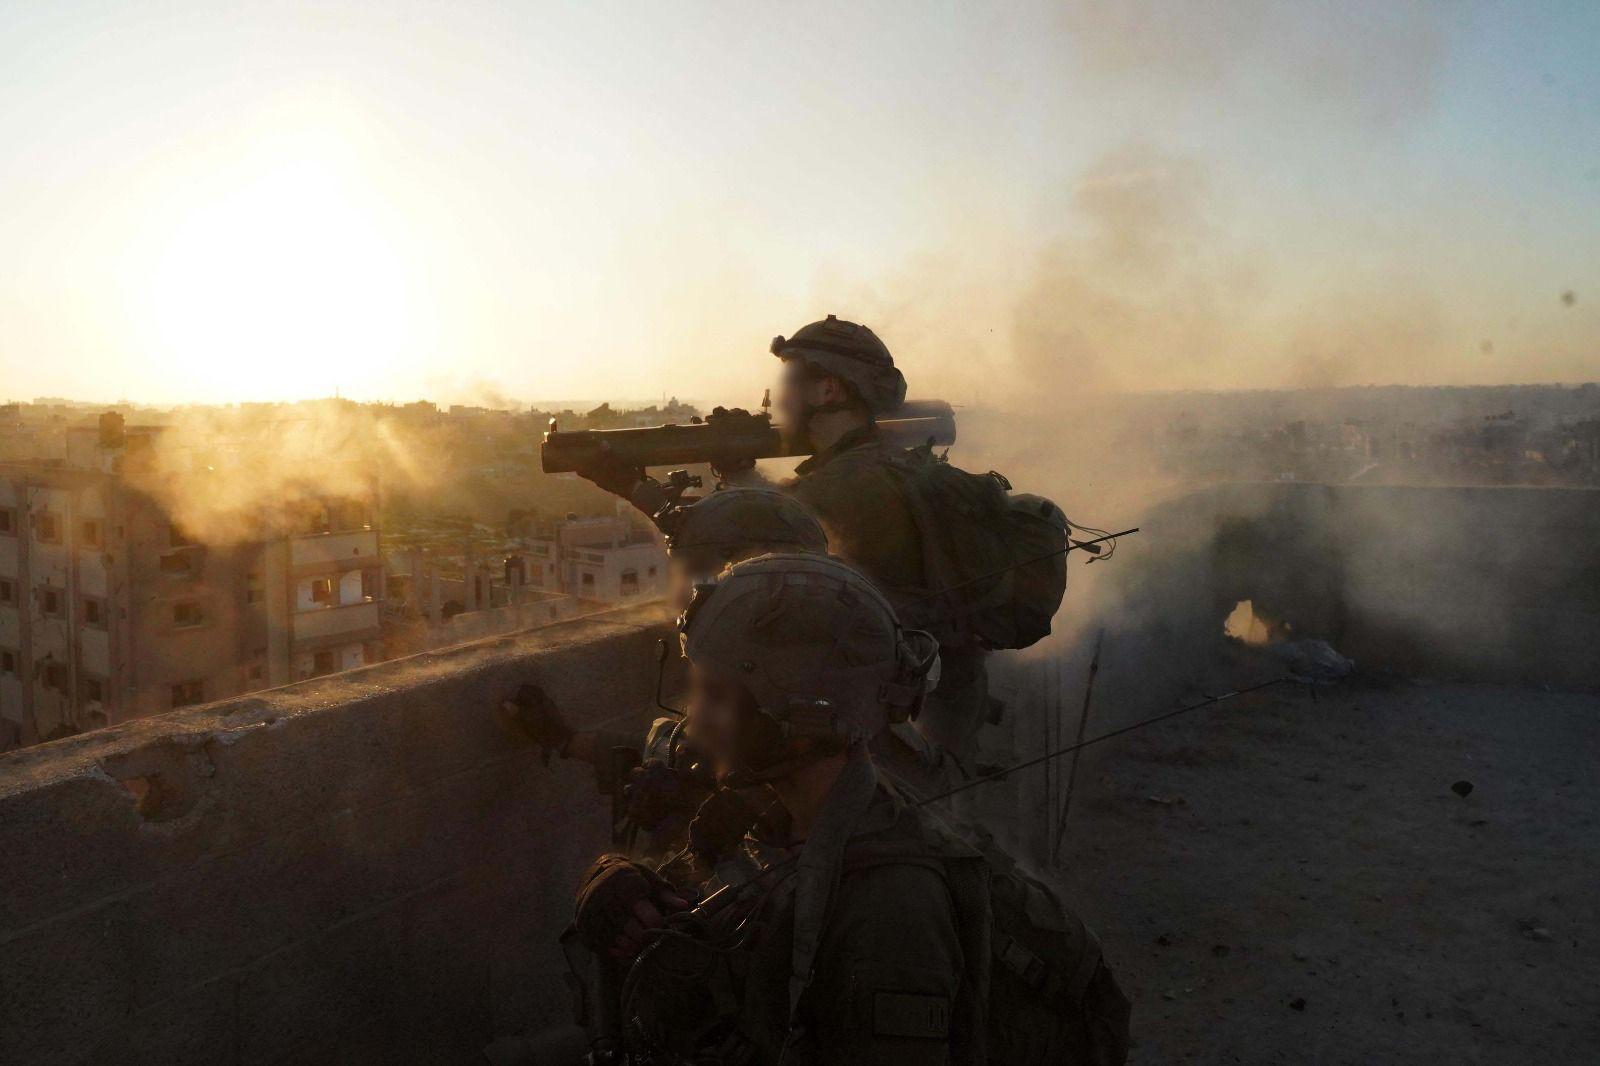 Israeli Military Fires Norwegian-Finnish Weapon in Gaza Conflict, Experts Confirm